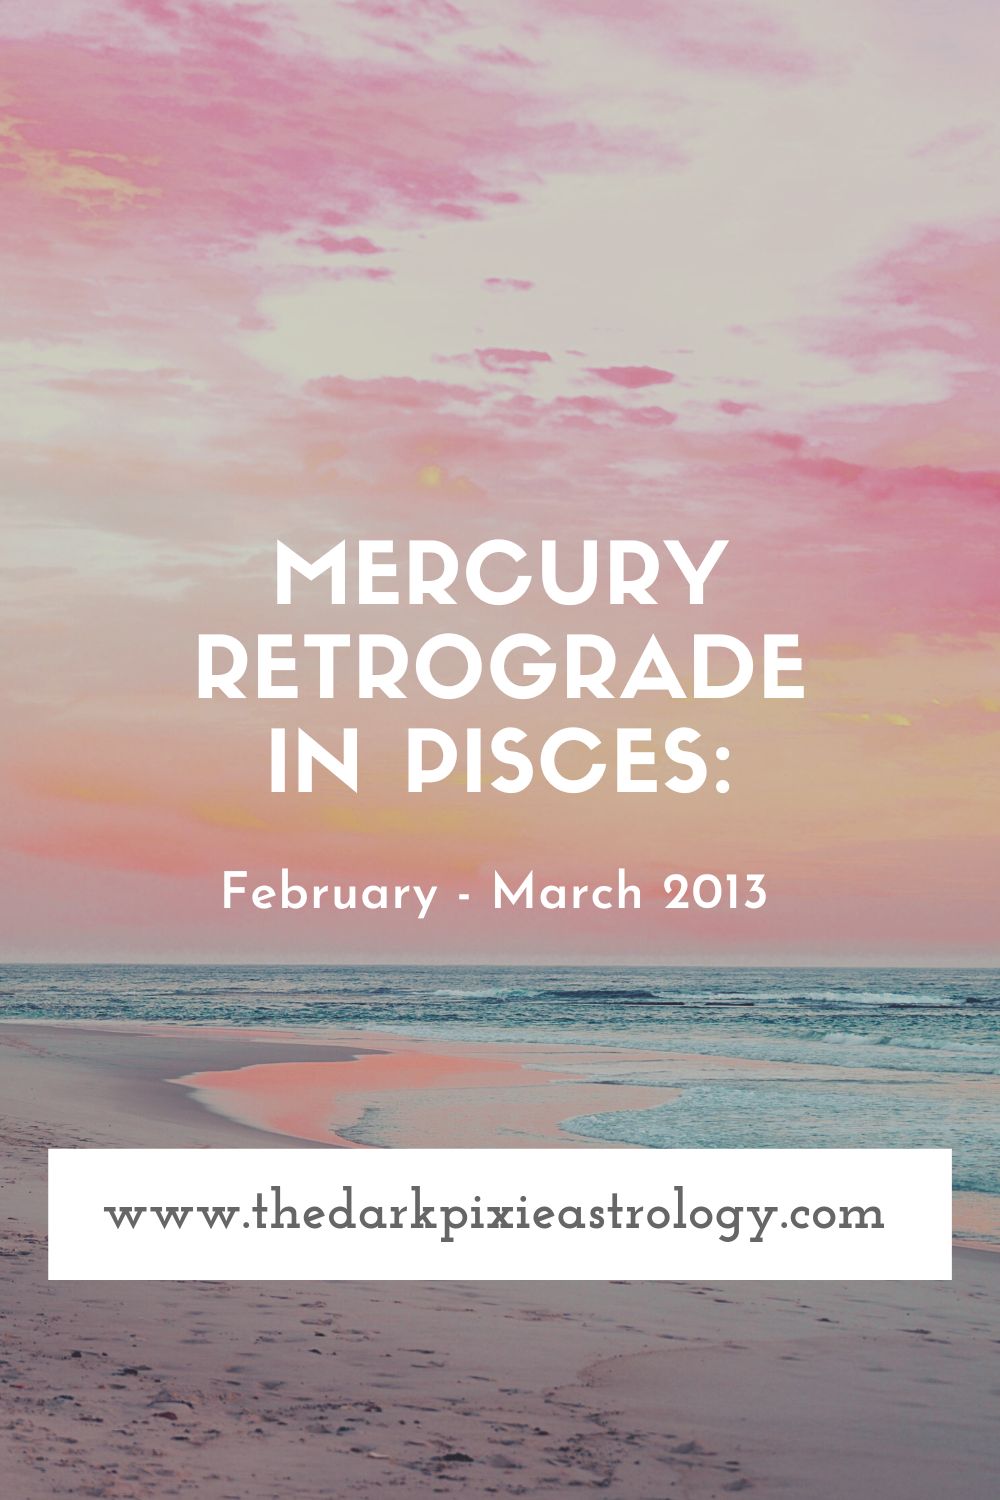 Mercury retrograde in Pisces: February - March 2013 - The Dark Pixie Astrology